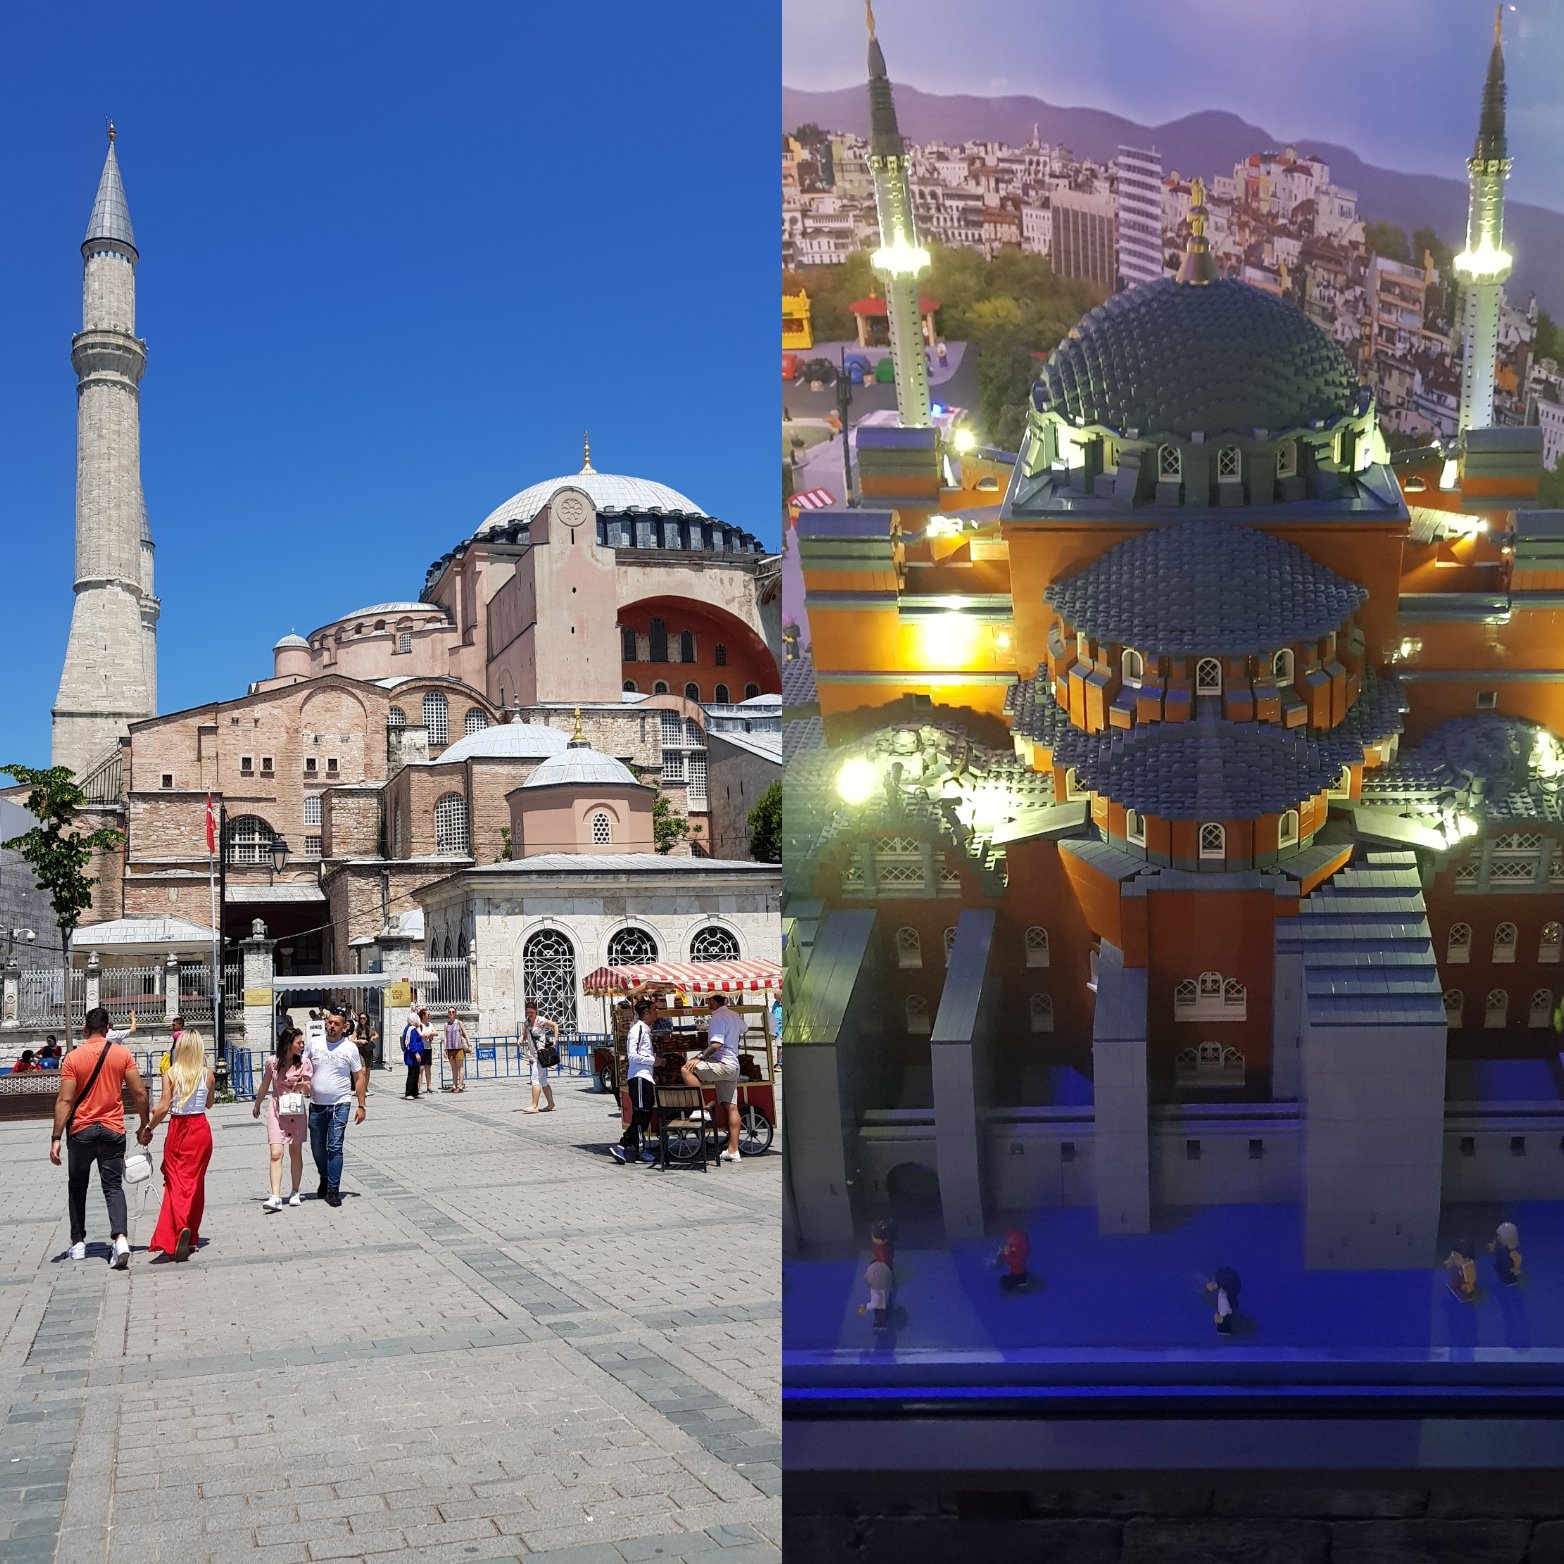 gøre det muligt for At regere dedikation Sam Meekings on Twitter: "You know you're on holidays with kids when you  don't just see Hagia Sophia, you have to see the lego version too  https://t.co/O1fbRWHdFc" / Twitter